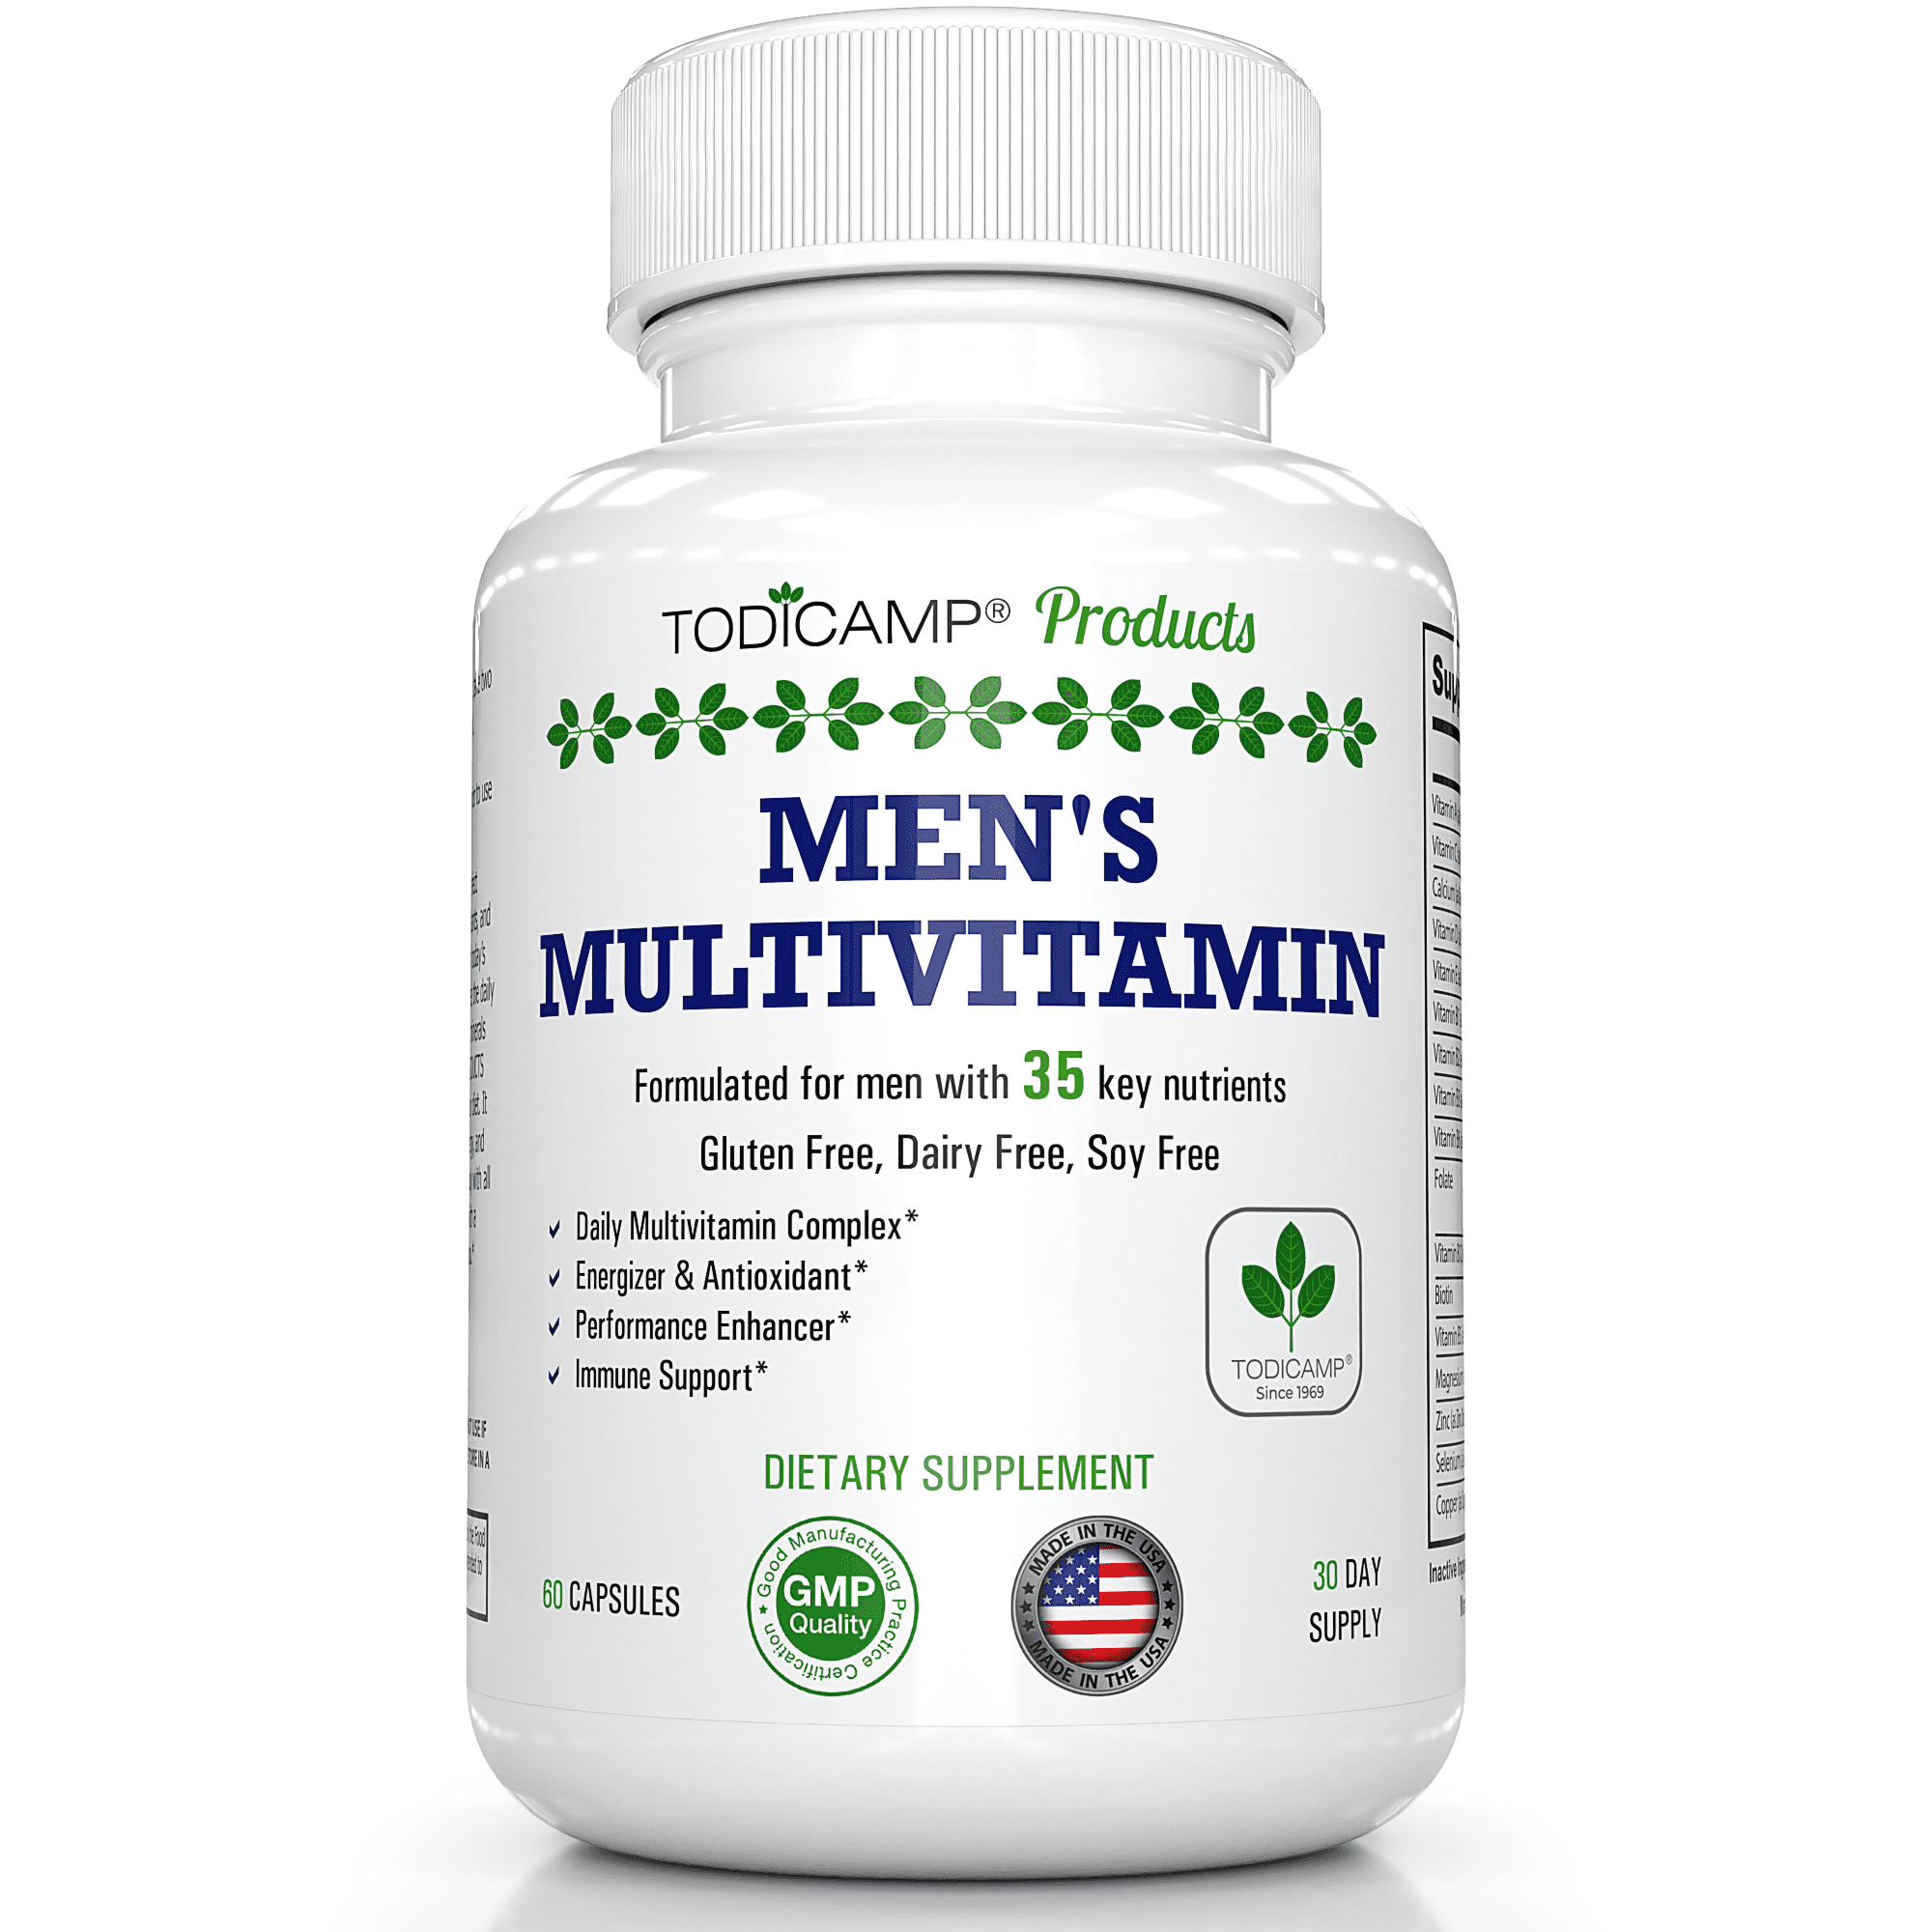 Multivitamin for Men Todicamp - 35 Nutrients - Men's multivitamin & Mineral Complex Extracts - Improves Overall - Antioxidant & Natural Body Support - Day Supply - Walmart.com